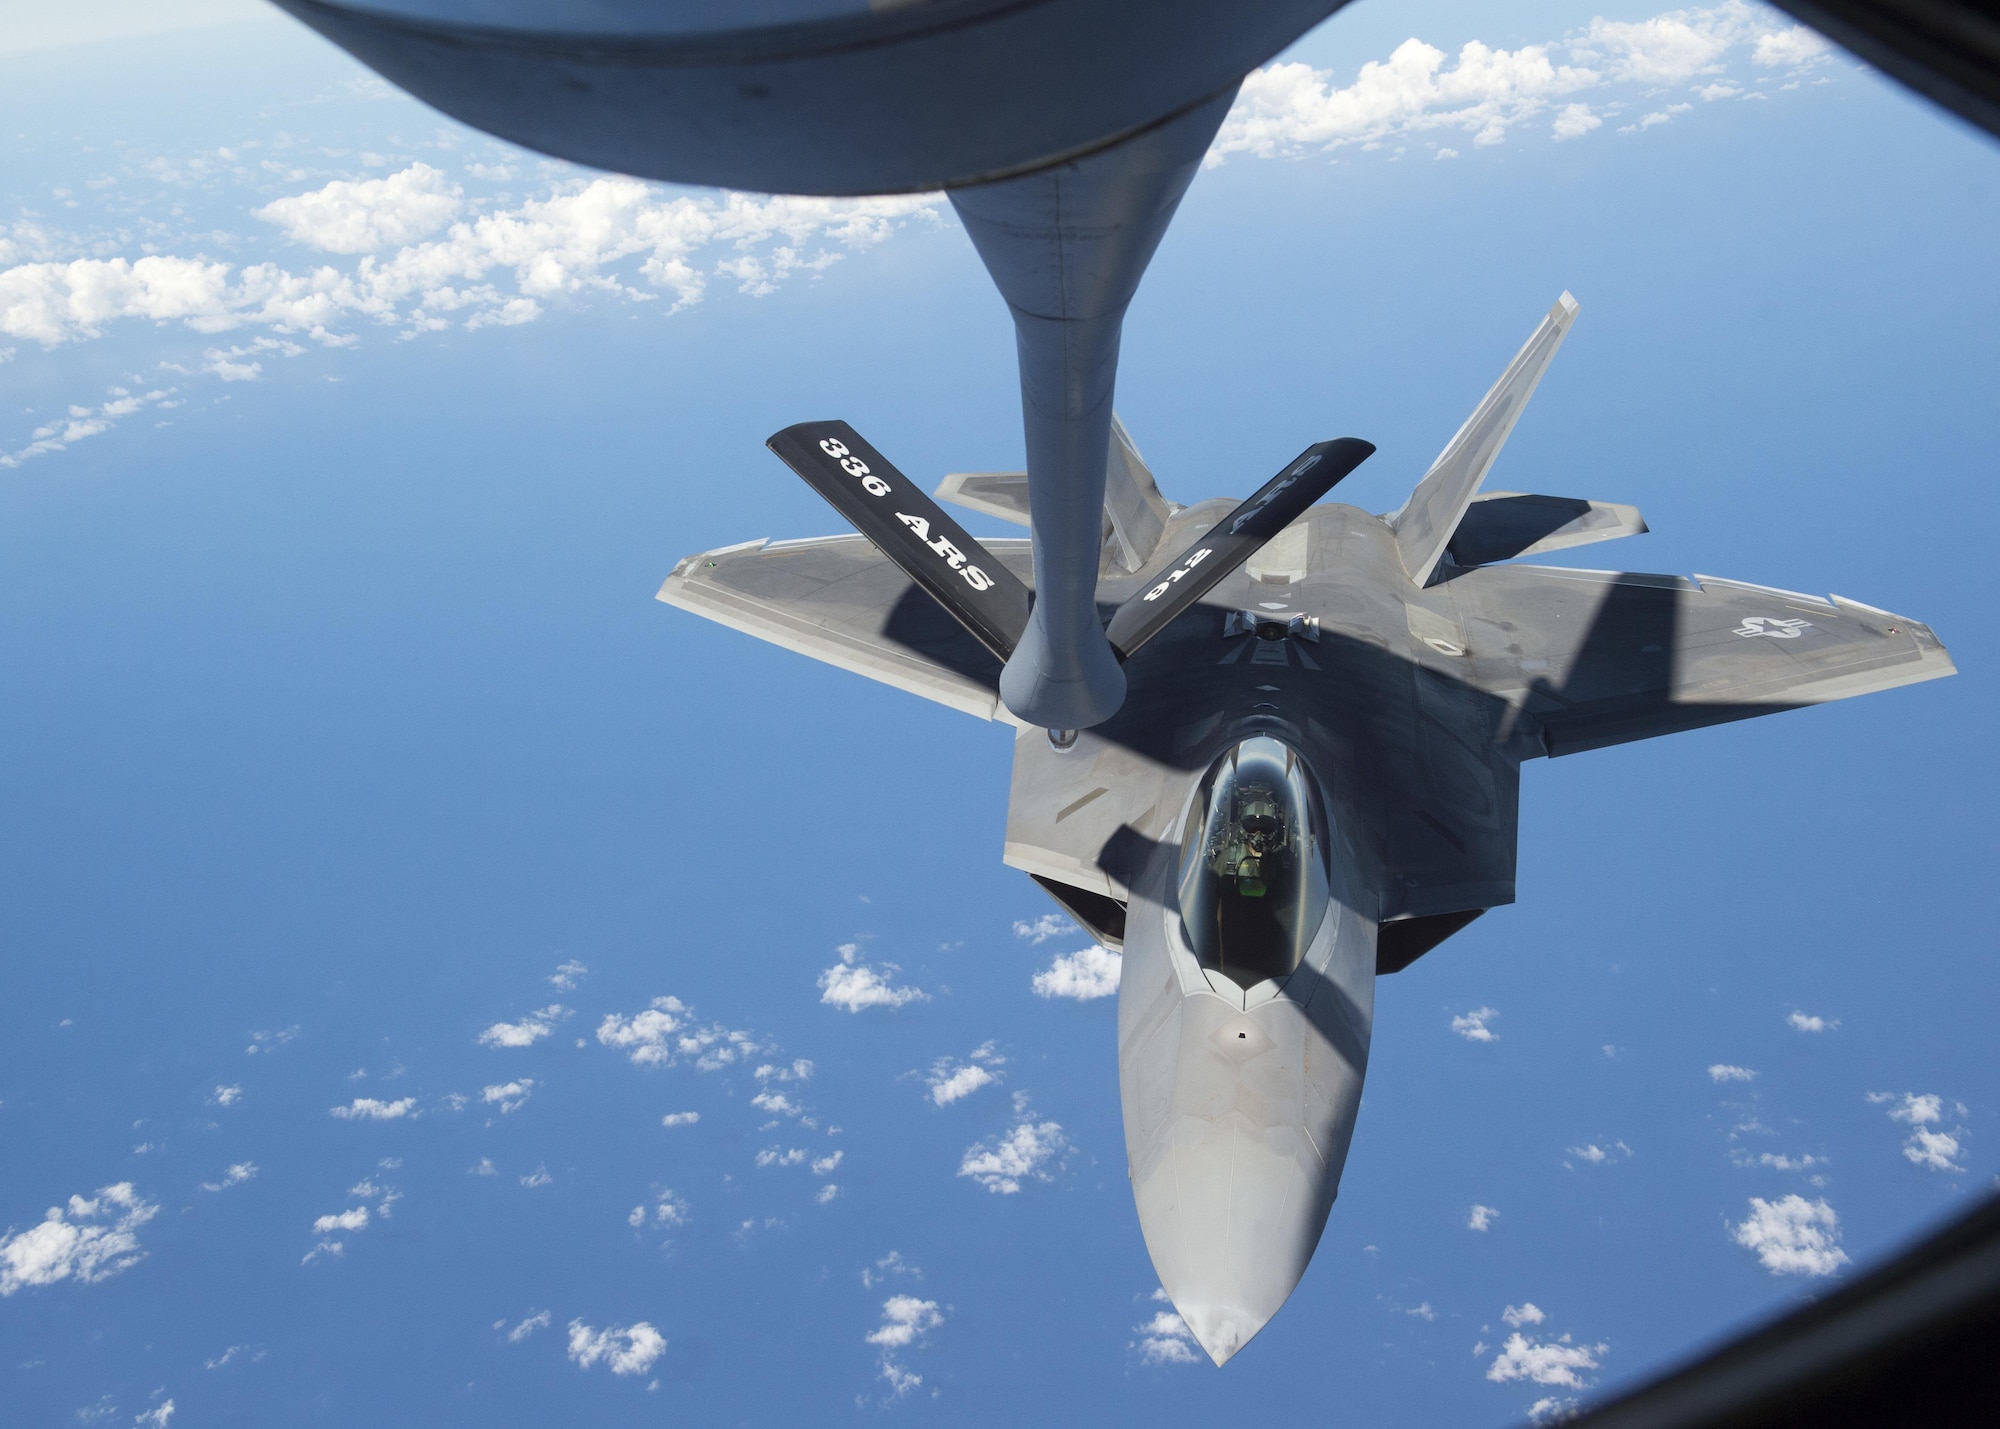 An F-22 Raptor from the 199th Fighter Squadron prepares for air refueling from a KC-135R Stratotanker operated by 465th Air Refueling Squadron from Tinker Air Force Base, Oklahoma, during Rim of the Pacific 2016 over Joint Base Pearl Harbor-Hickam, Hawaii, July 26, 2016. (U.S. Navy photo by Mass Communication Specialist 2nd Class Gregory A. Harden II)